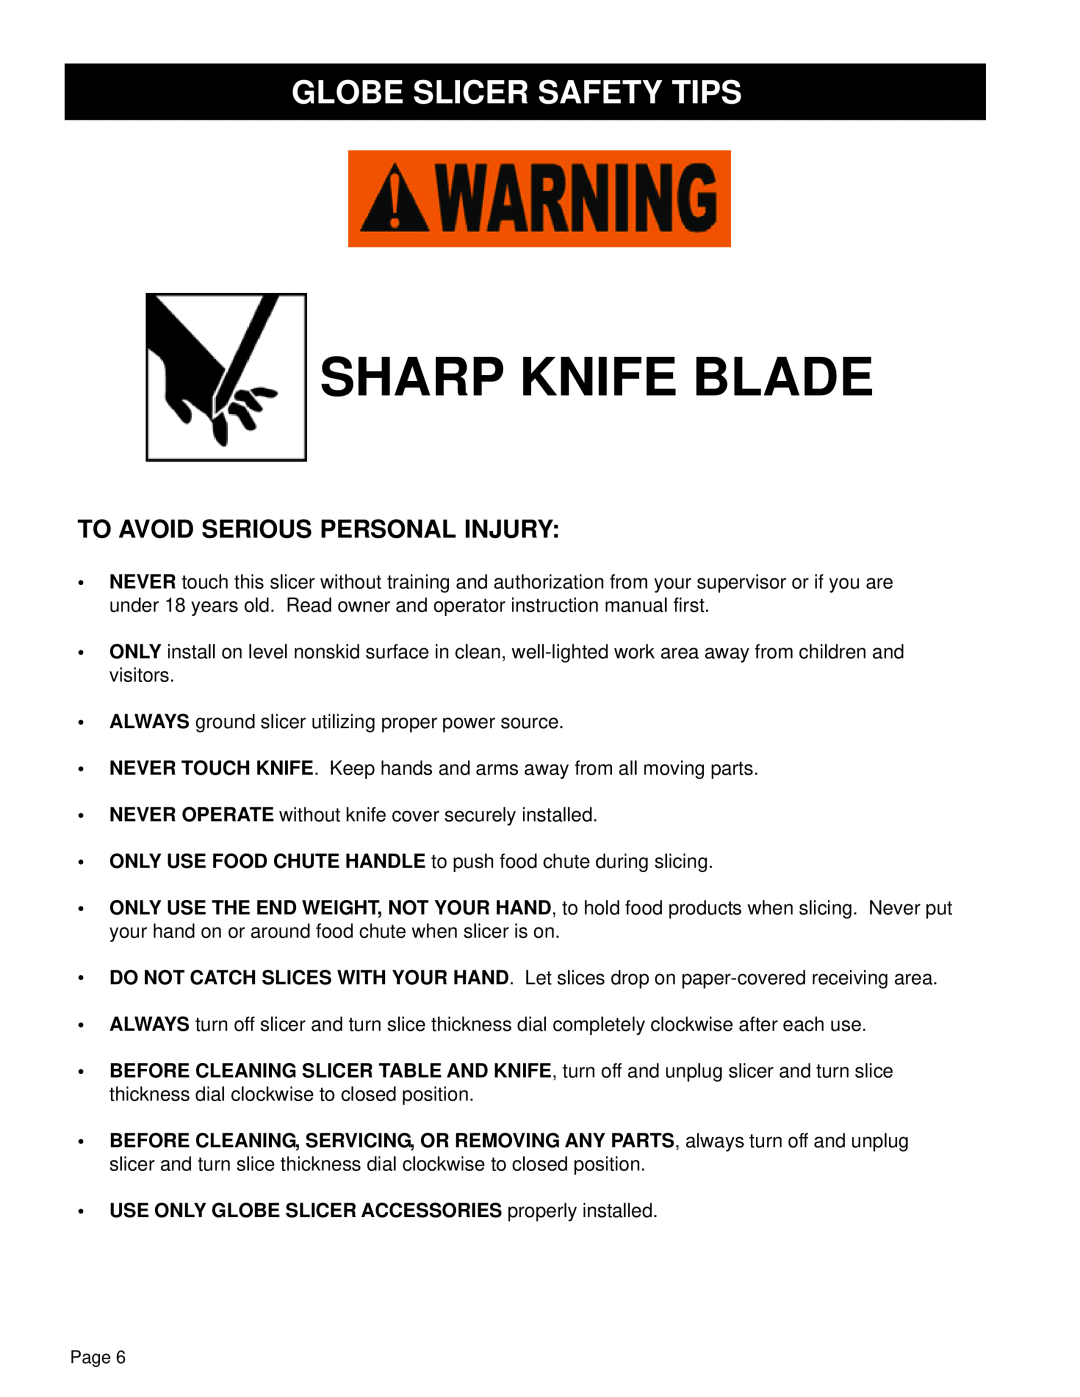 Globe GL12 instruction manual Globe Slicer Safety Tips, To Avoid Serious Personal Injury, Sharp Knife Blade 